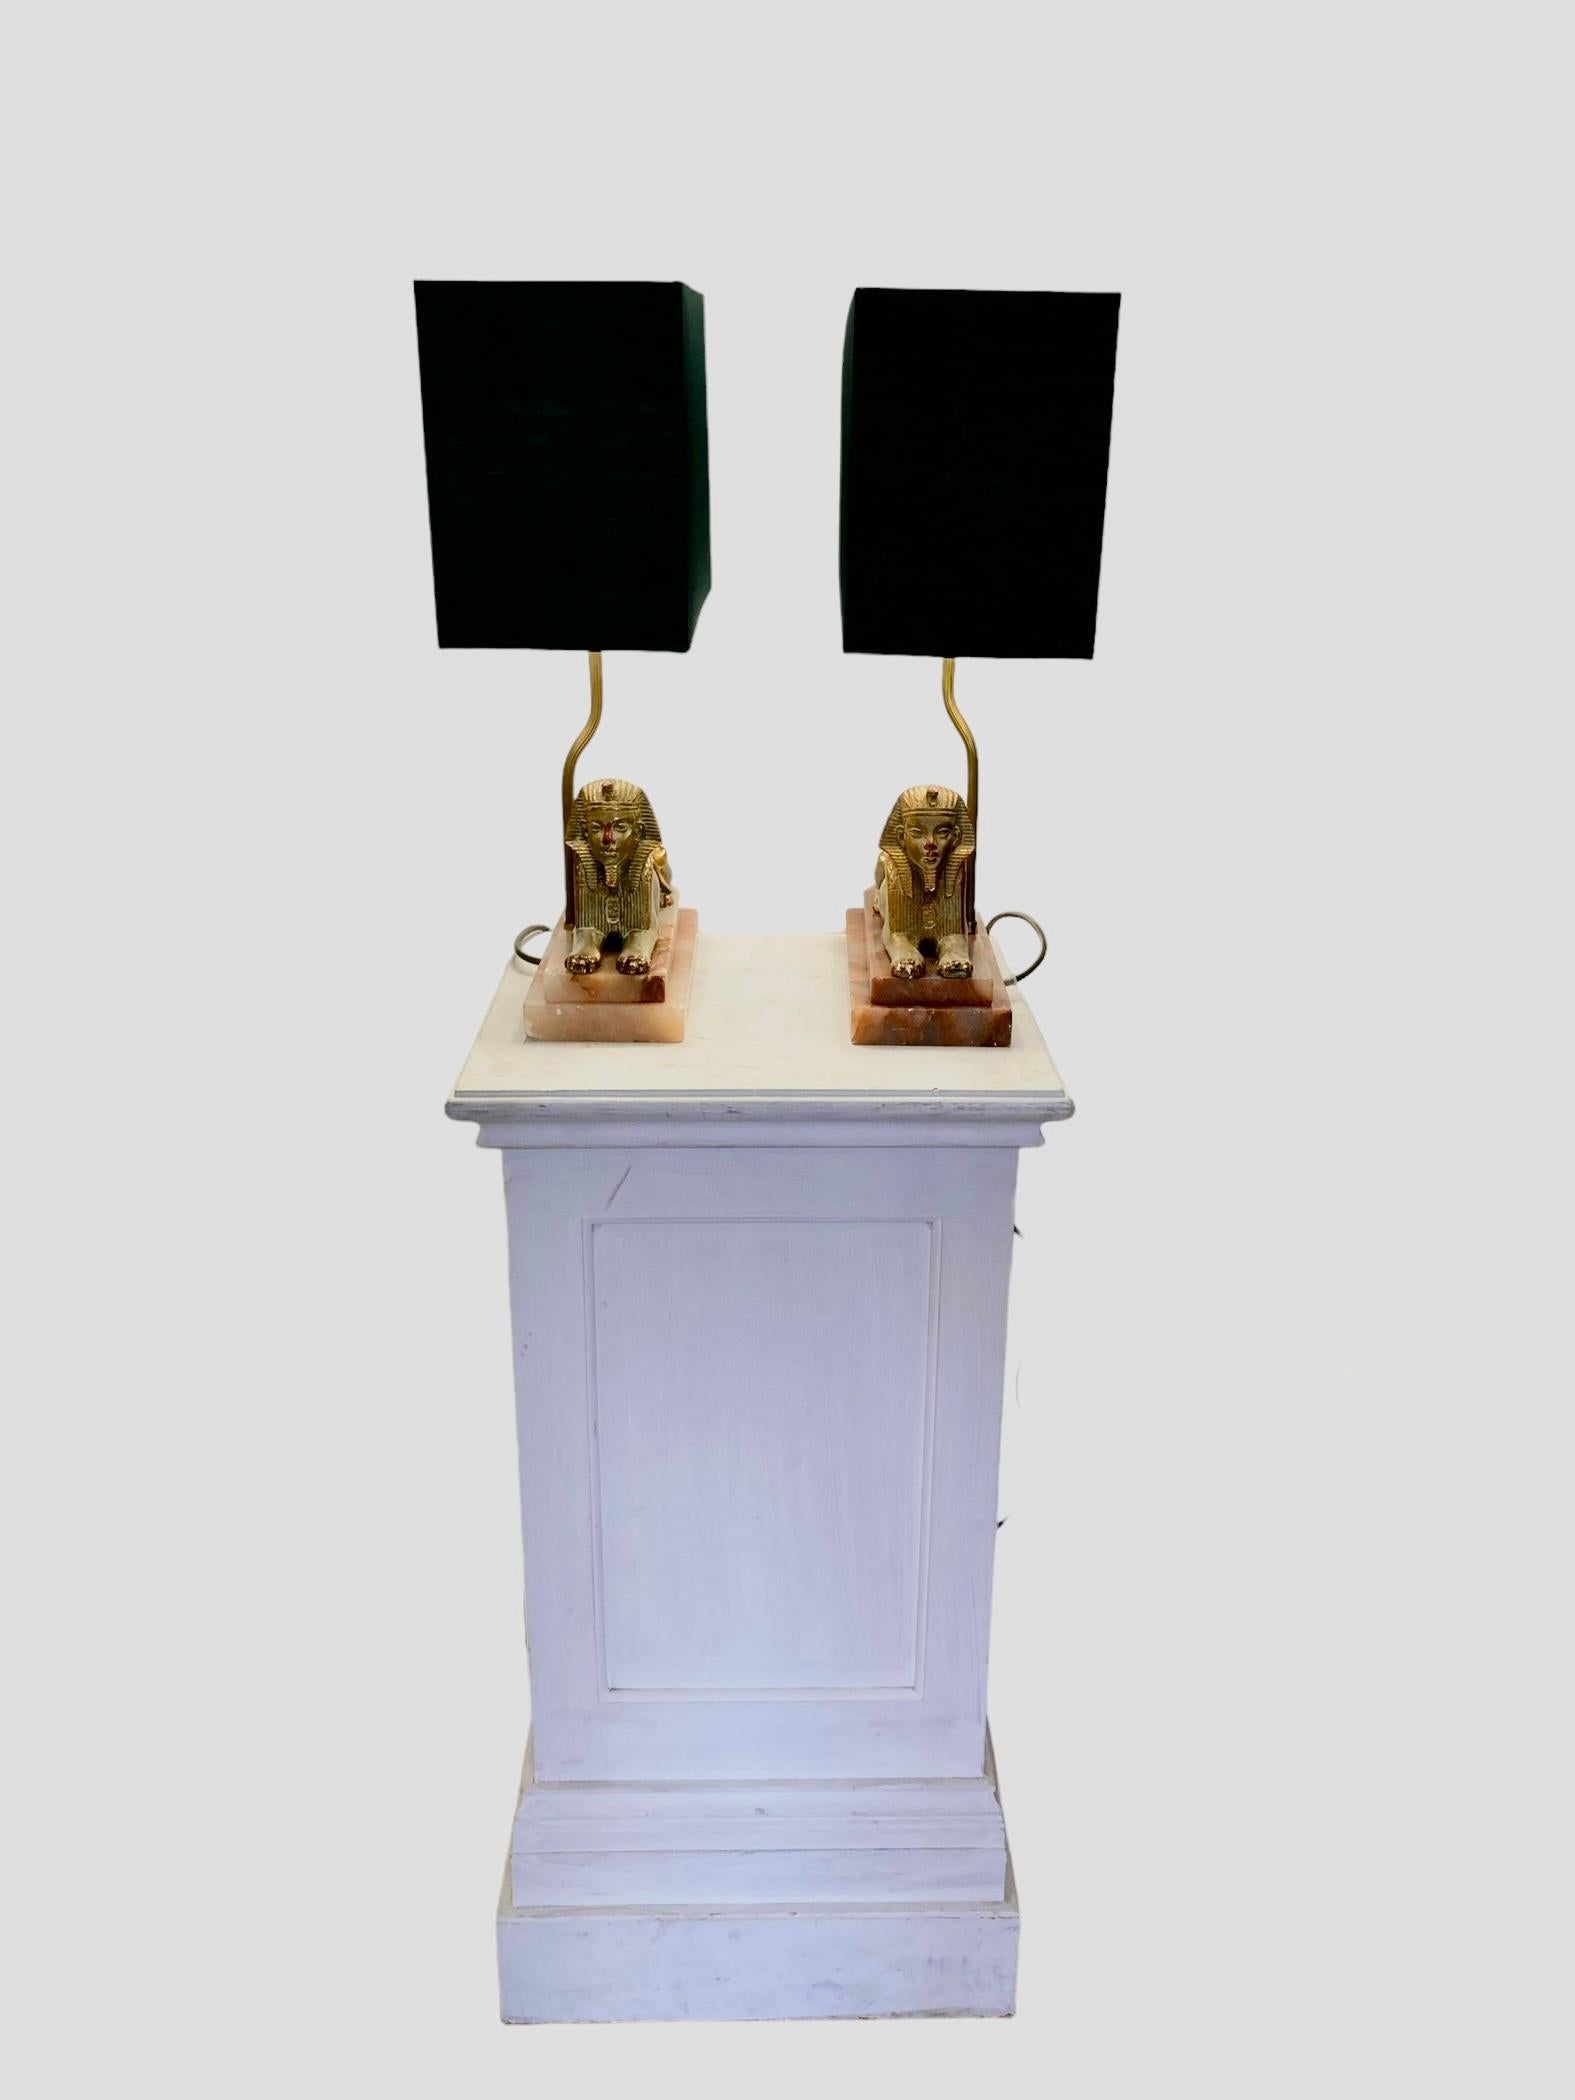 20th Century A Pair of Art Deco Egytian Sphinx Table Lamps on a Marble Base Dark Green Shades